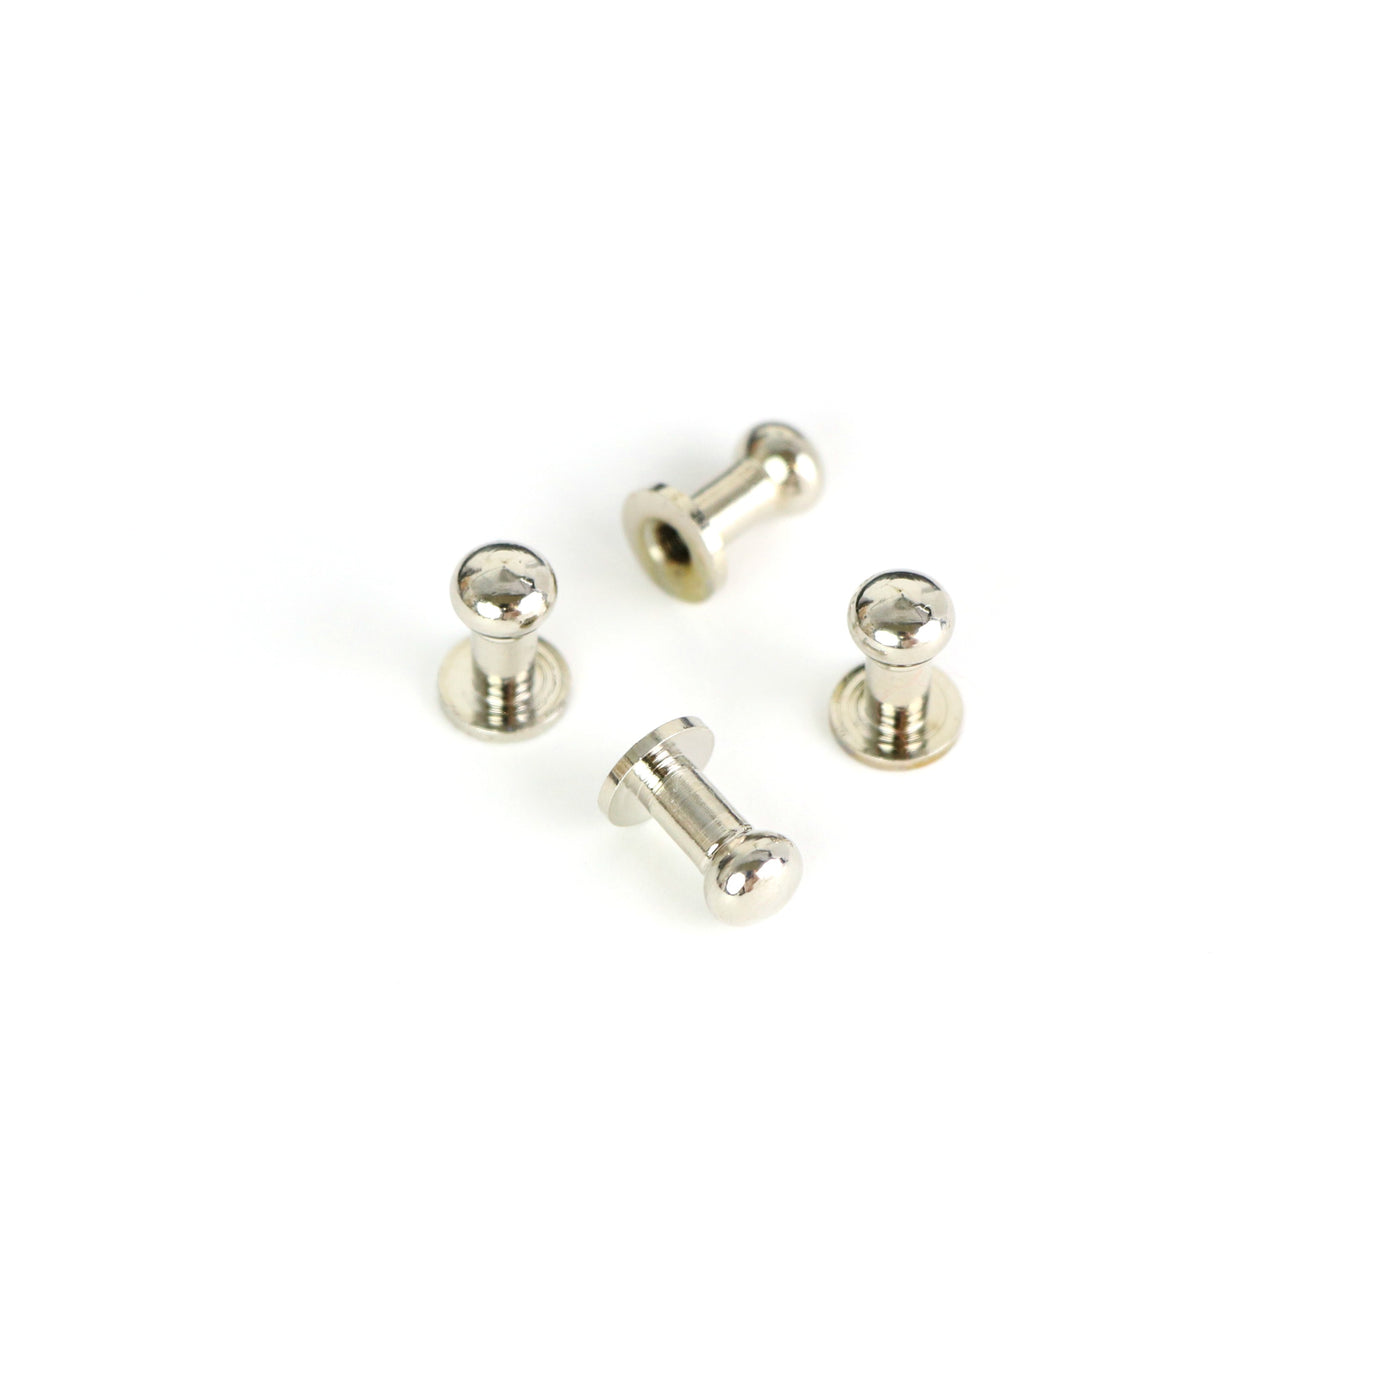 Tall Stud Buttons: 4 Pack, 12mm